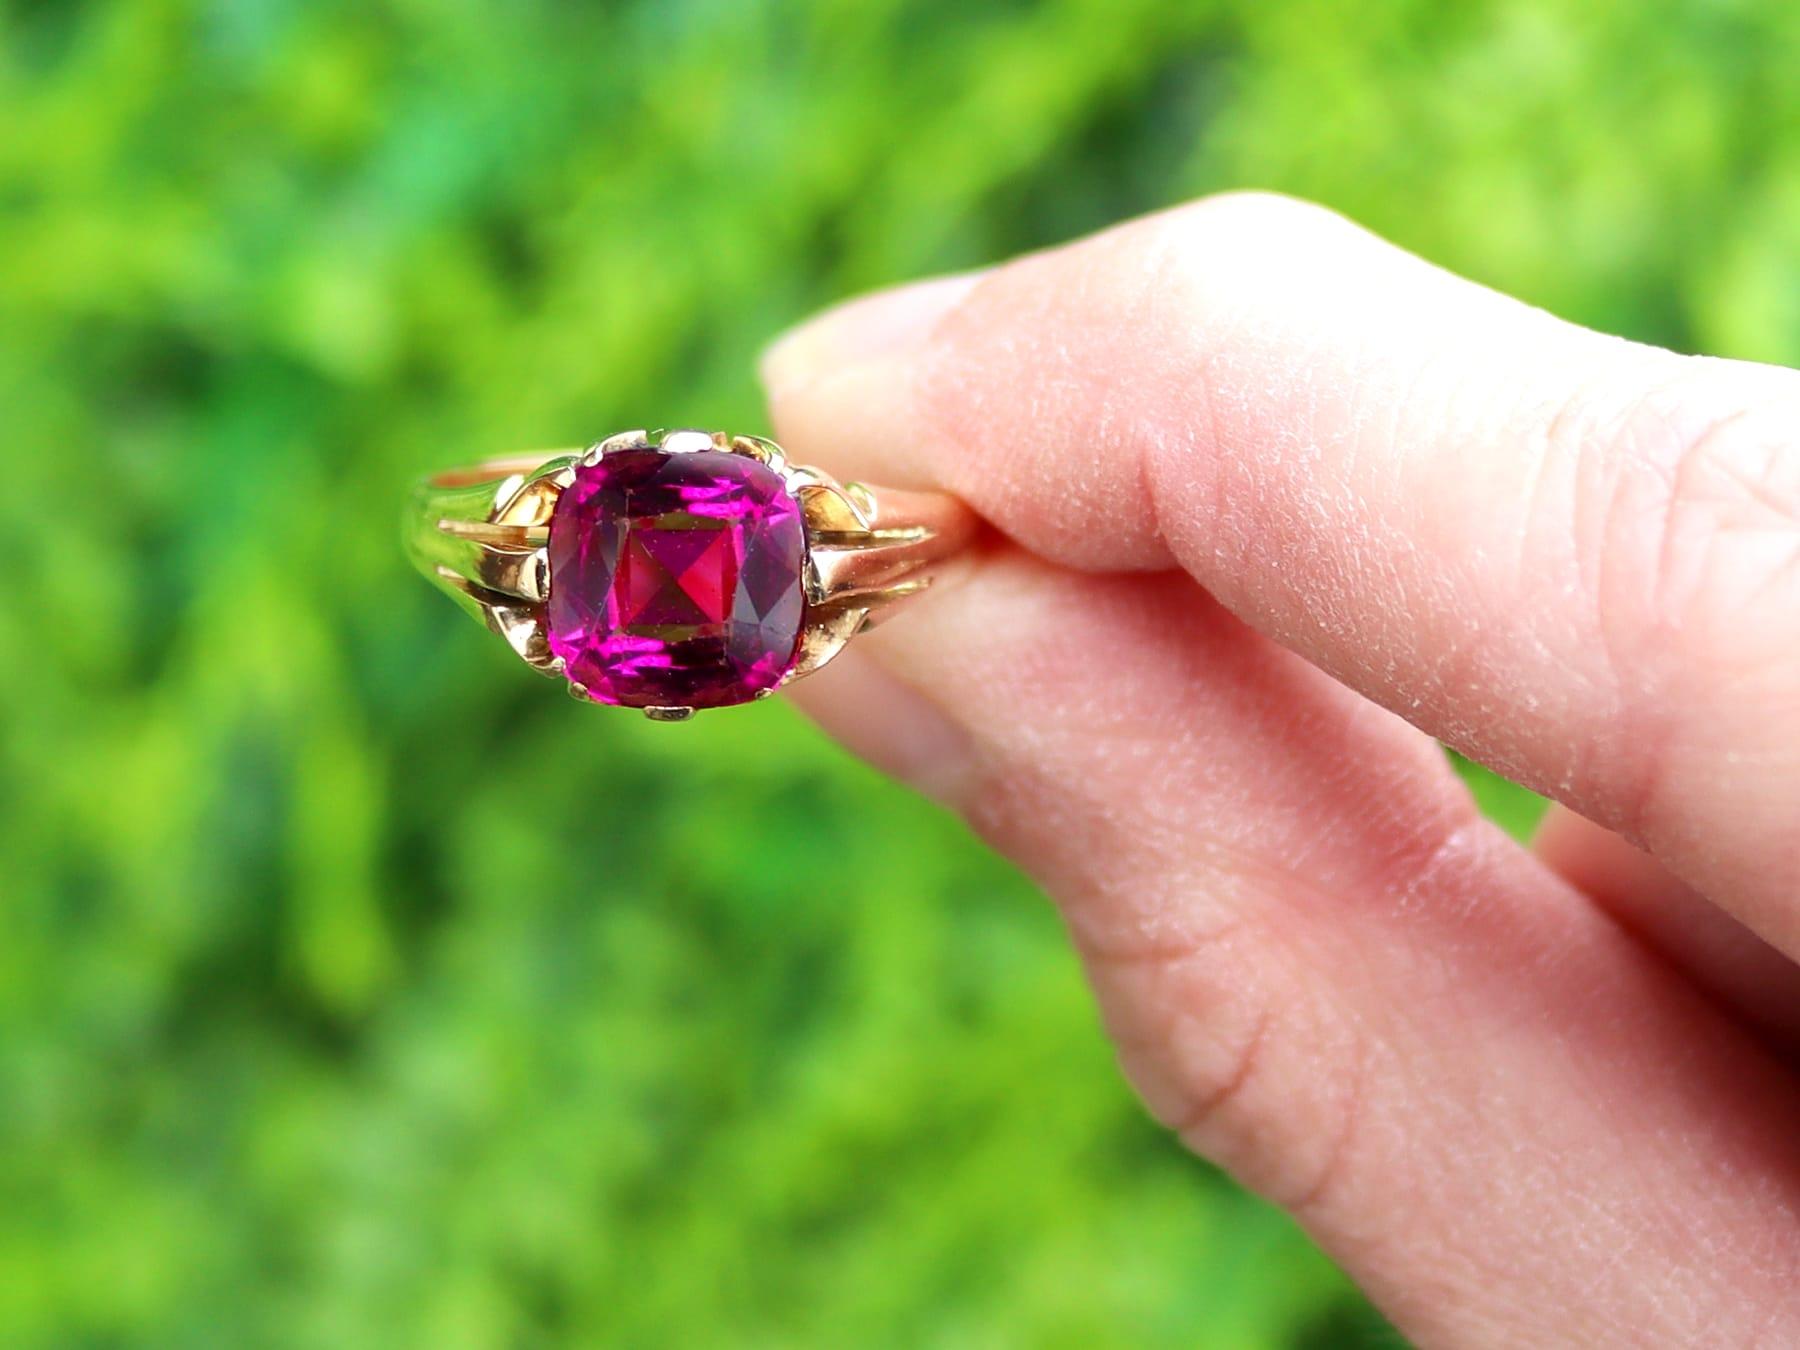 A fine and impressive antique Victorian 3.84 carat garnet and 18 carat yellow gold dress ring; part of our diverse Victorian jewellery and estate jewelry collections

This fine and impressive Victorian garnet ring has been crafted in 18ct yellow